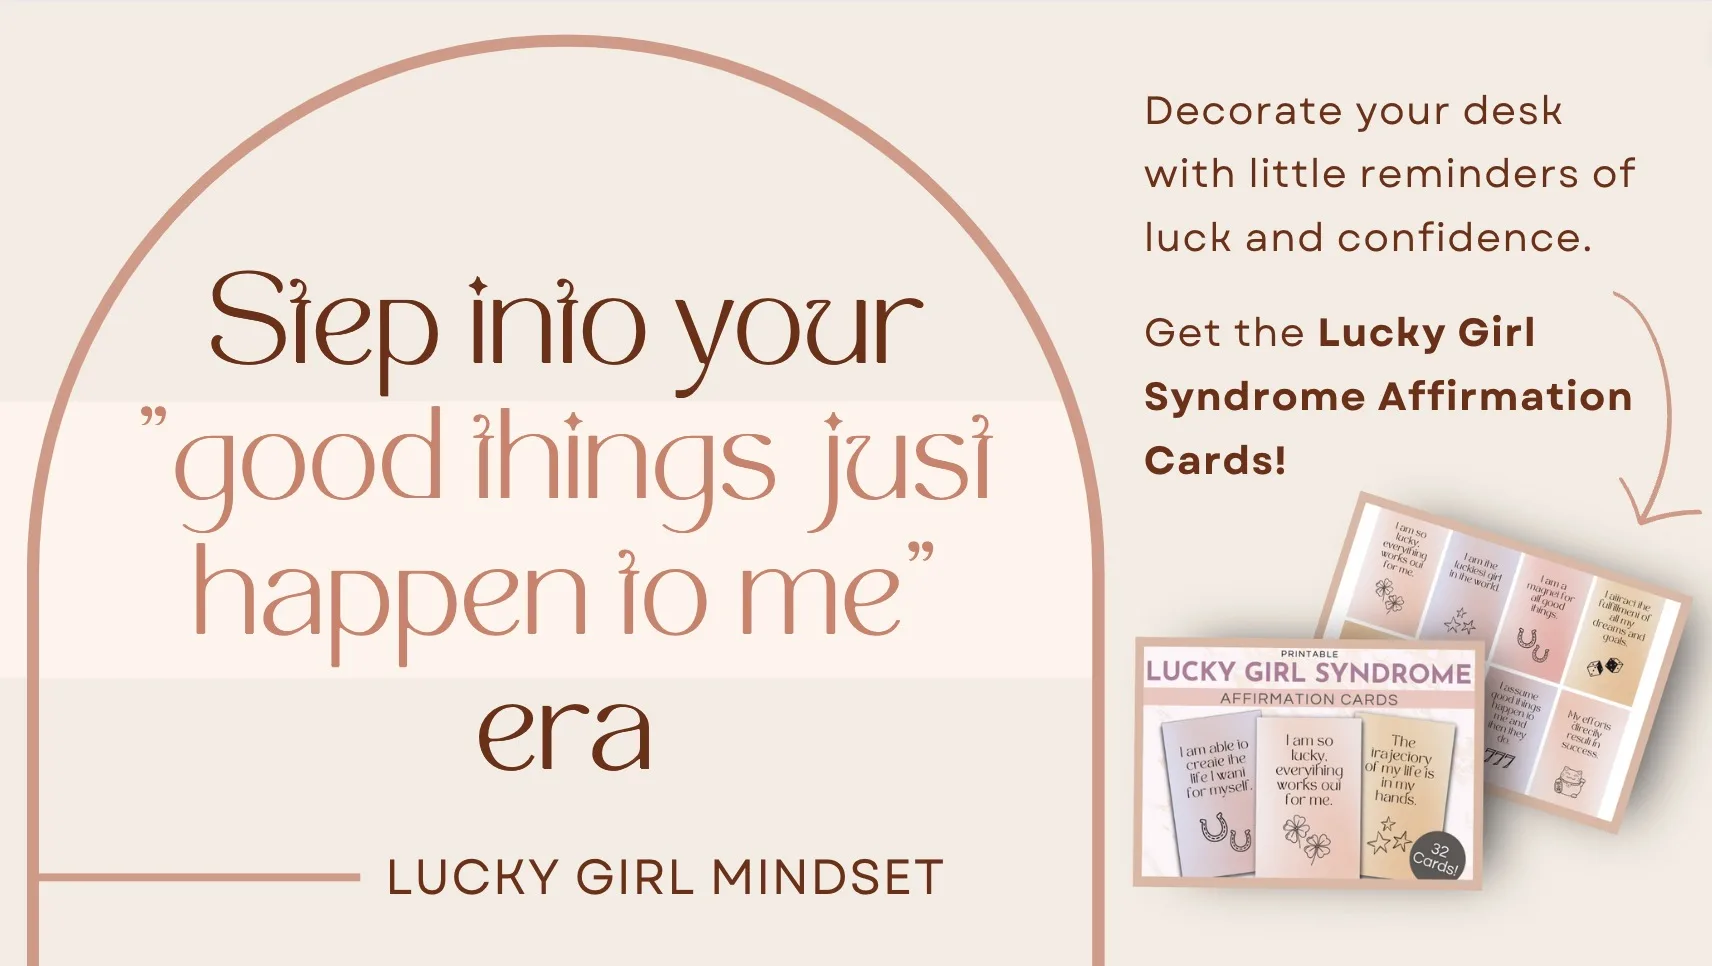 lucky girl syndrome affirmation cards